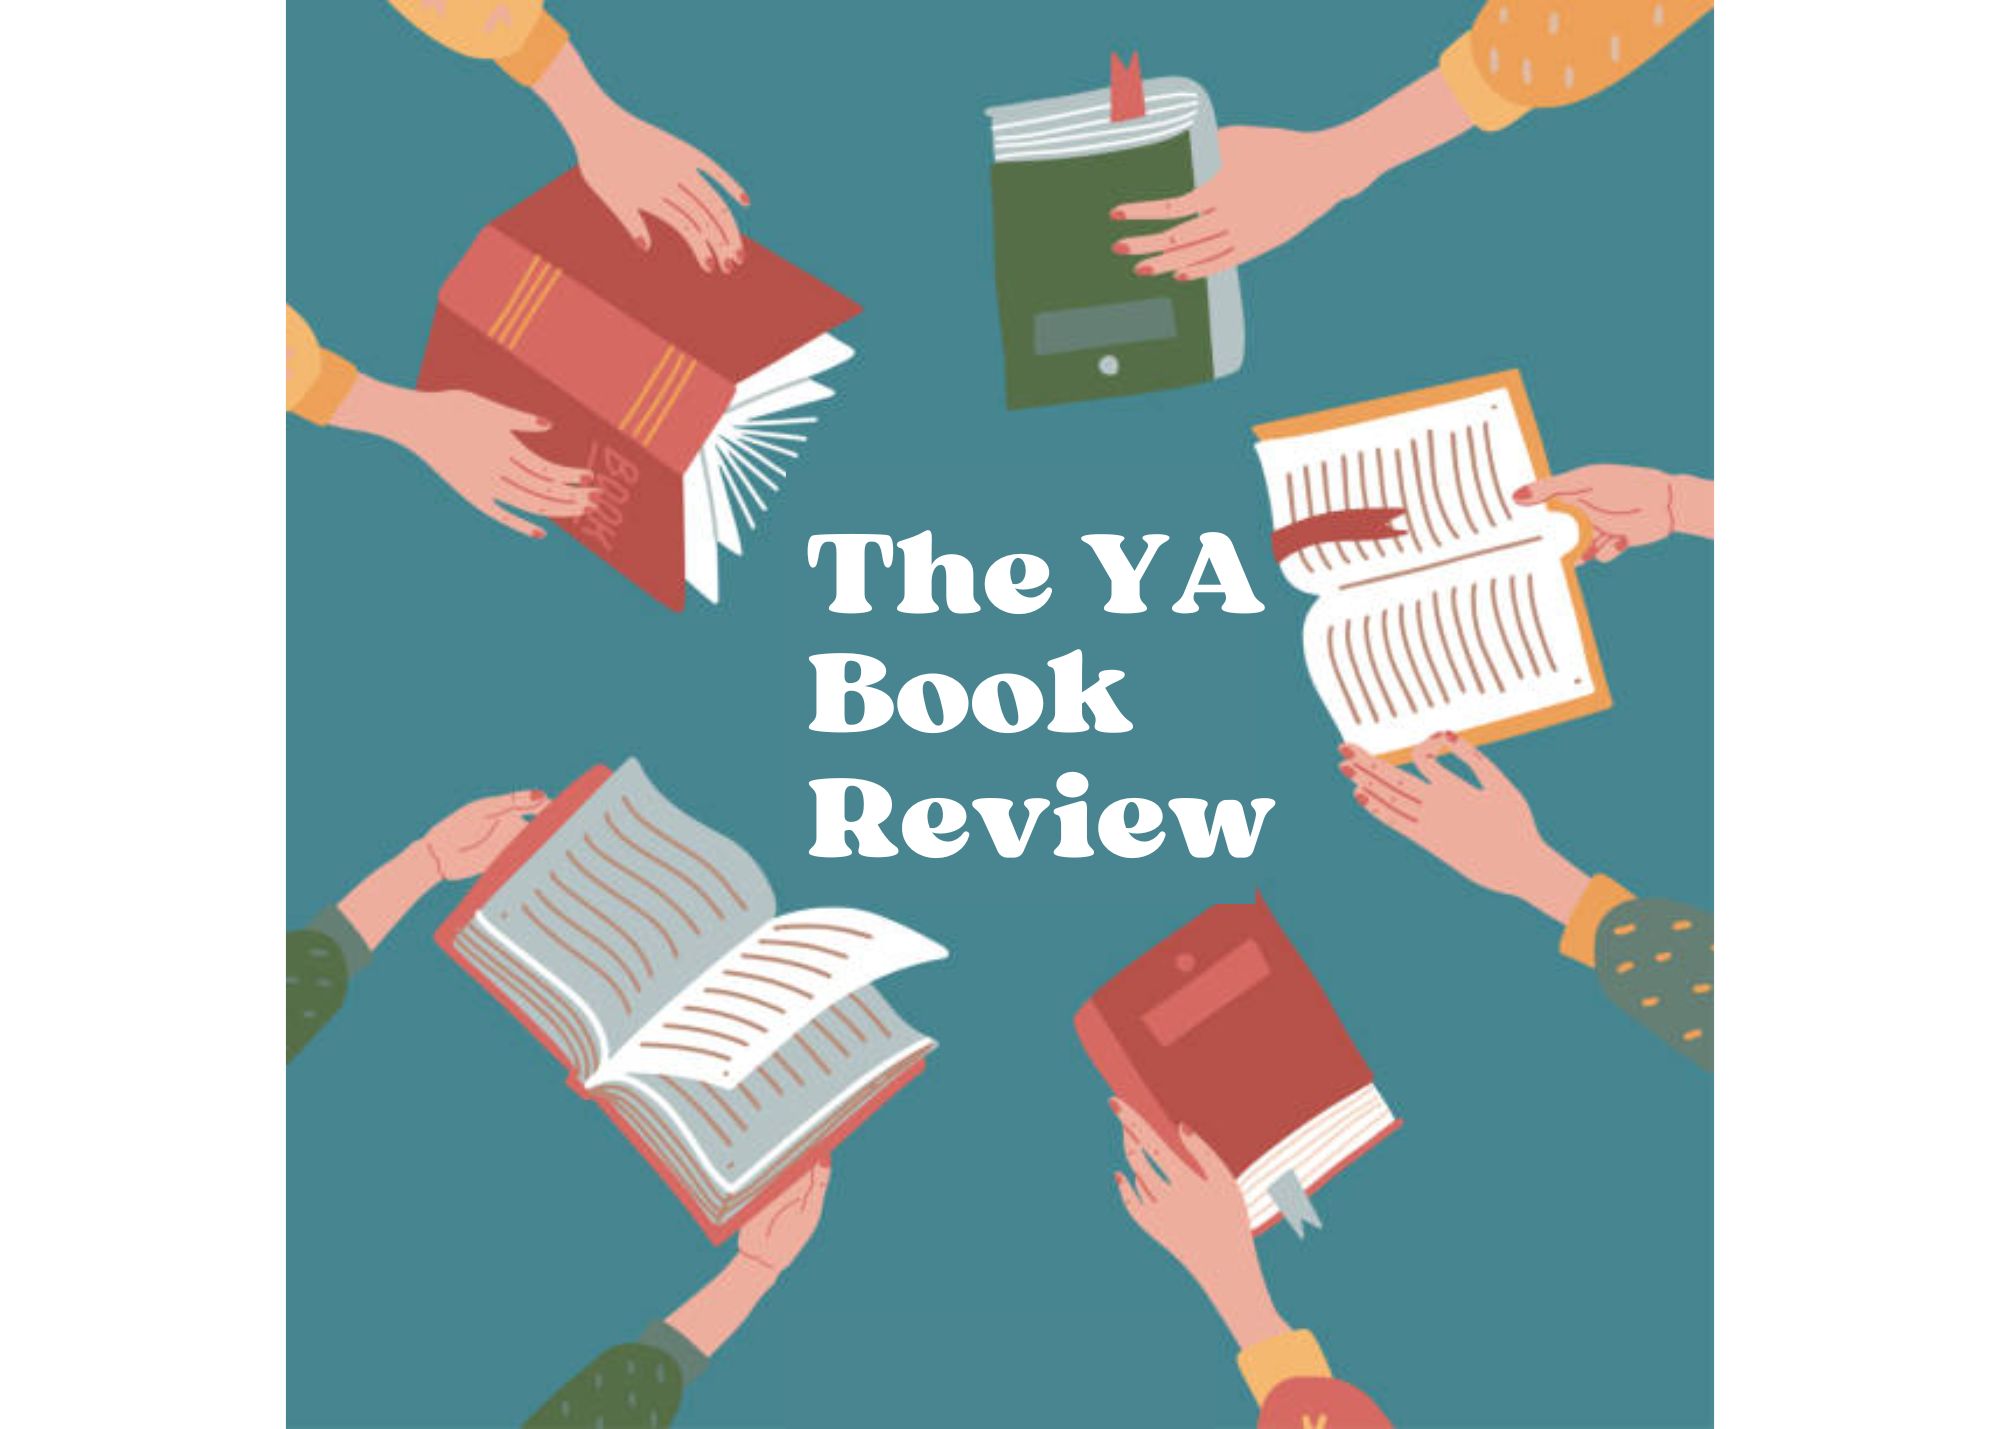 The YA Book Review